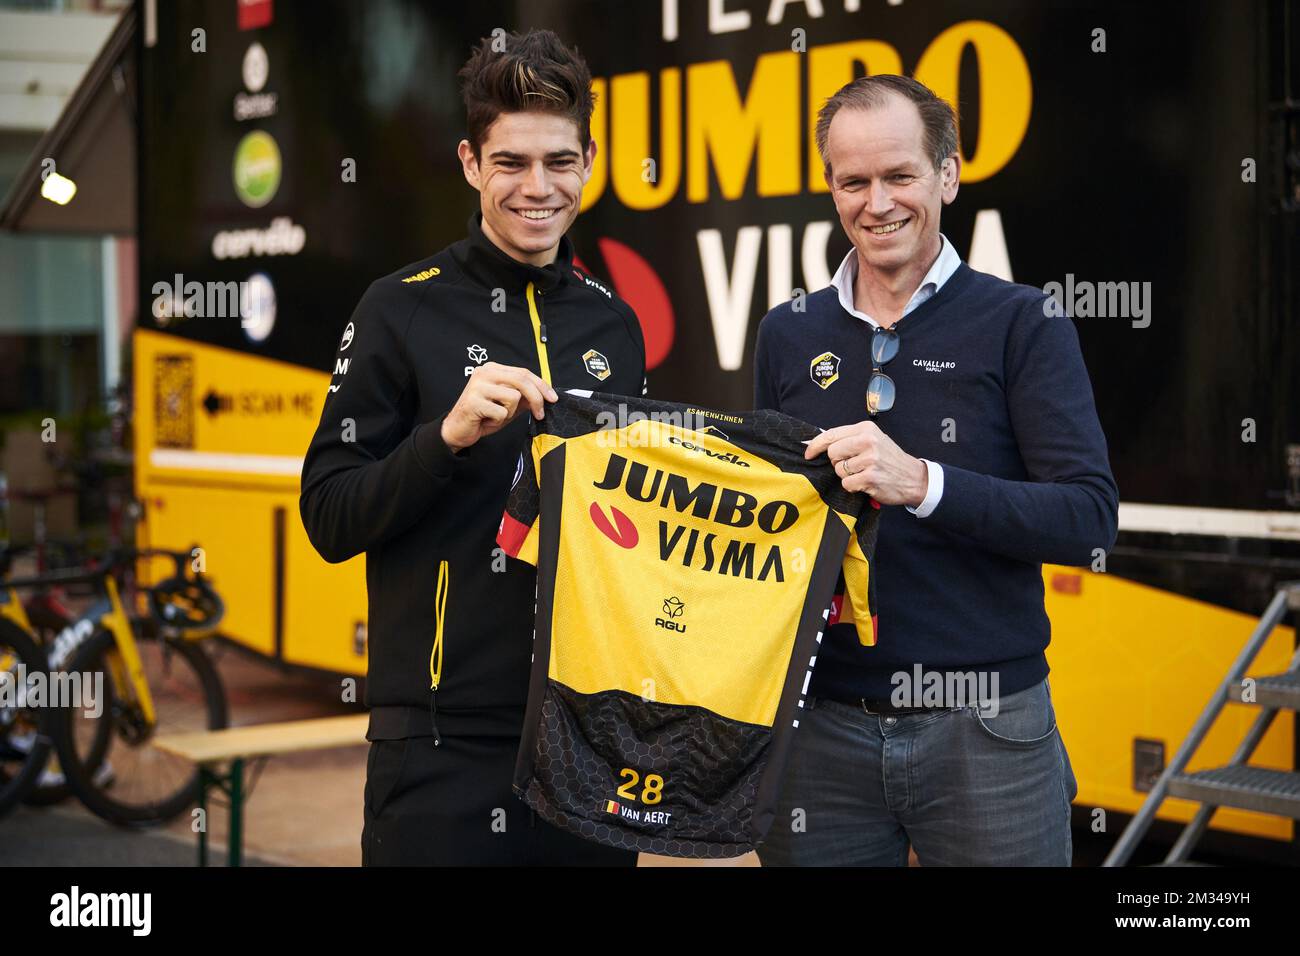 This handout picture shows Belgian Wout Van Aert of Team Jumbo-Visma and Team Jumbo-Visma general manager Richard Plugge posing for the photographer after announcing Van Aert will renew his contract, at the Team Jumbo-Visma cycling team stage in Alicante, in Spain, Tuesday 19 January 2021. BELGA PHOTO HANDOUT JUMBO-VISMA - BRAM BERKIEN  Stock Photo